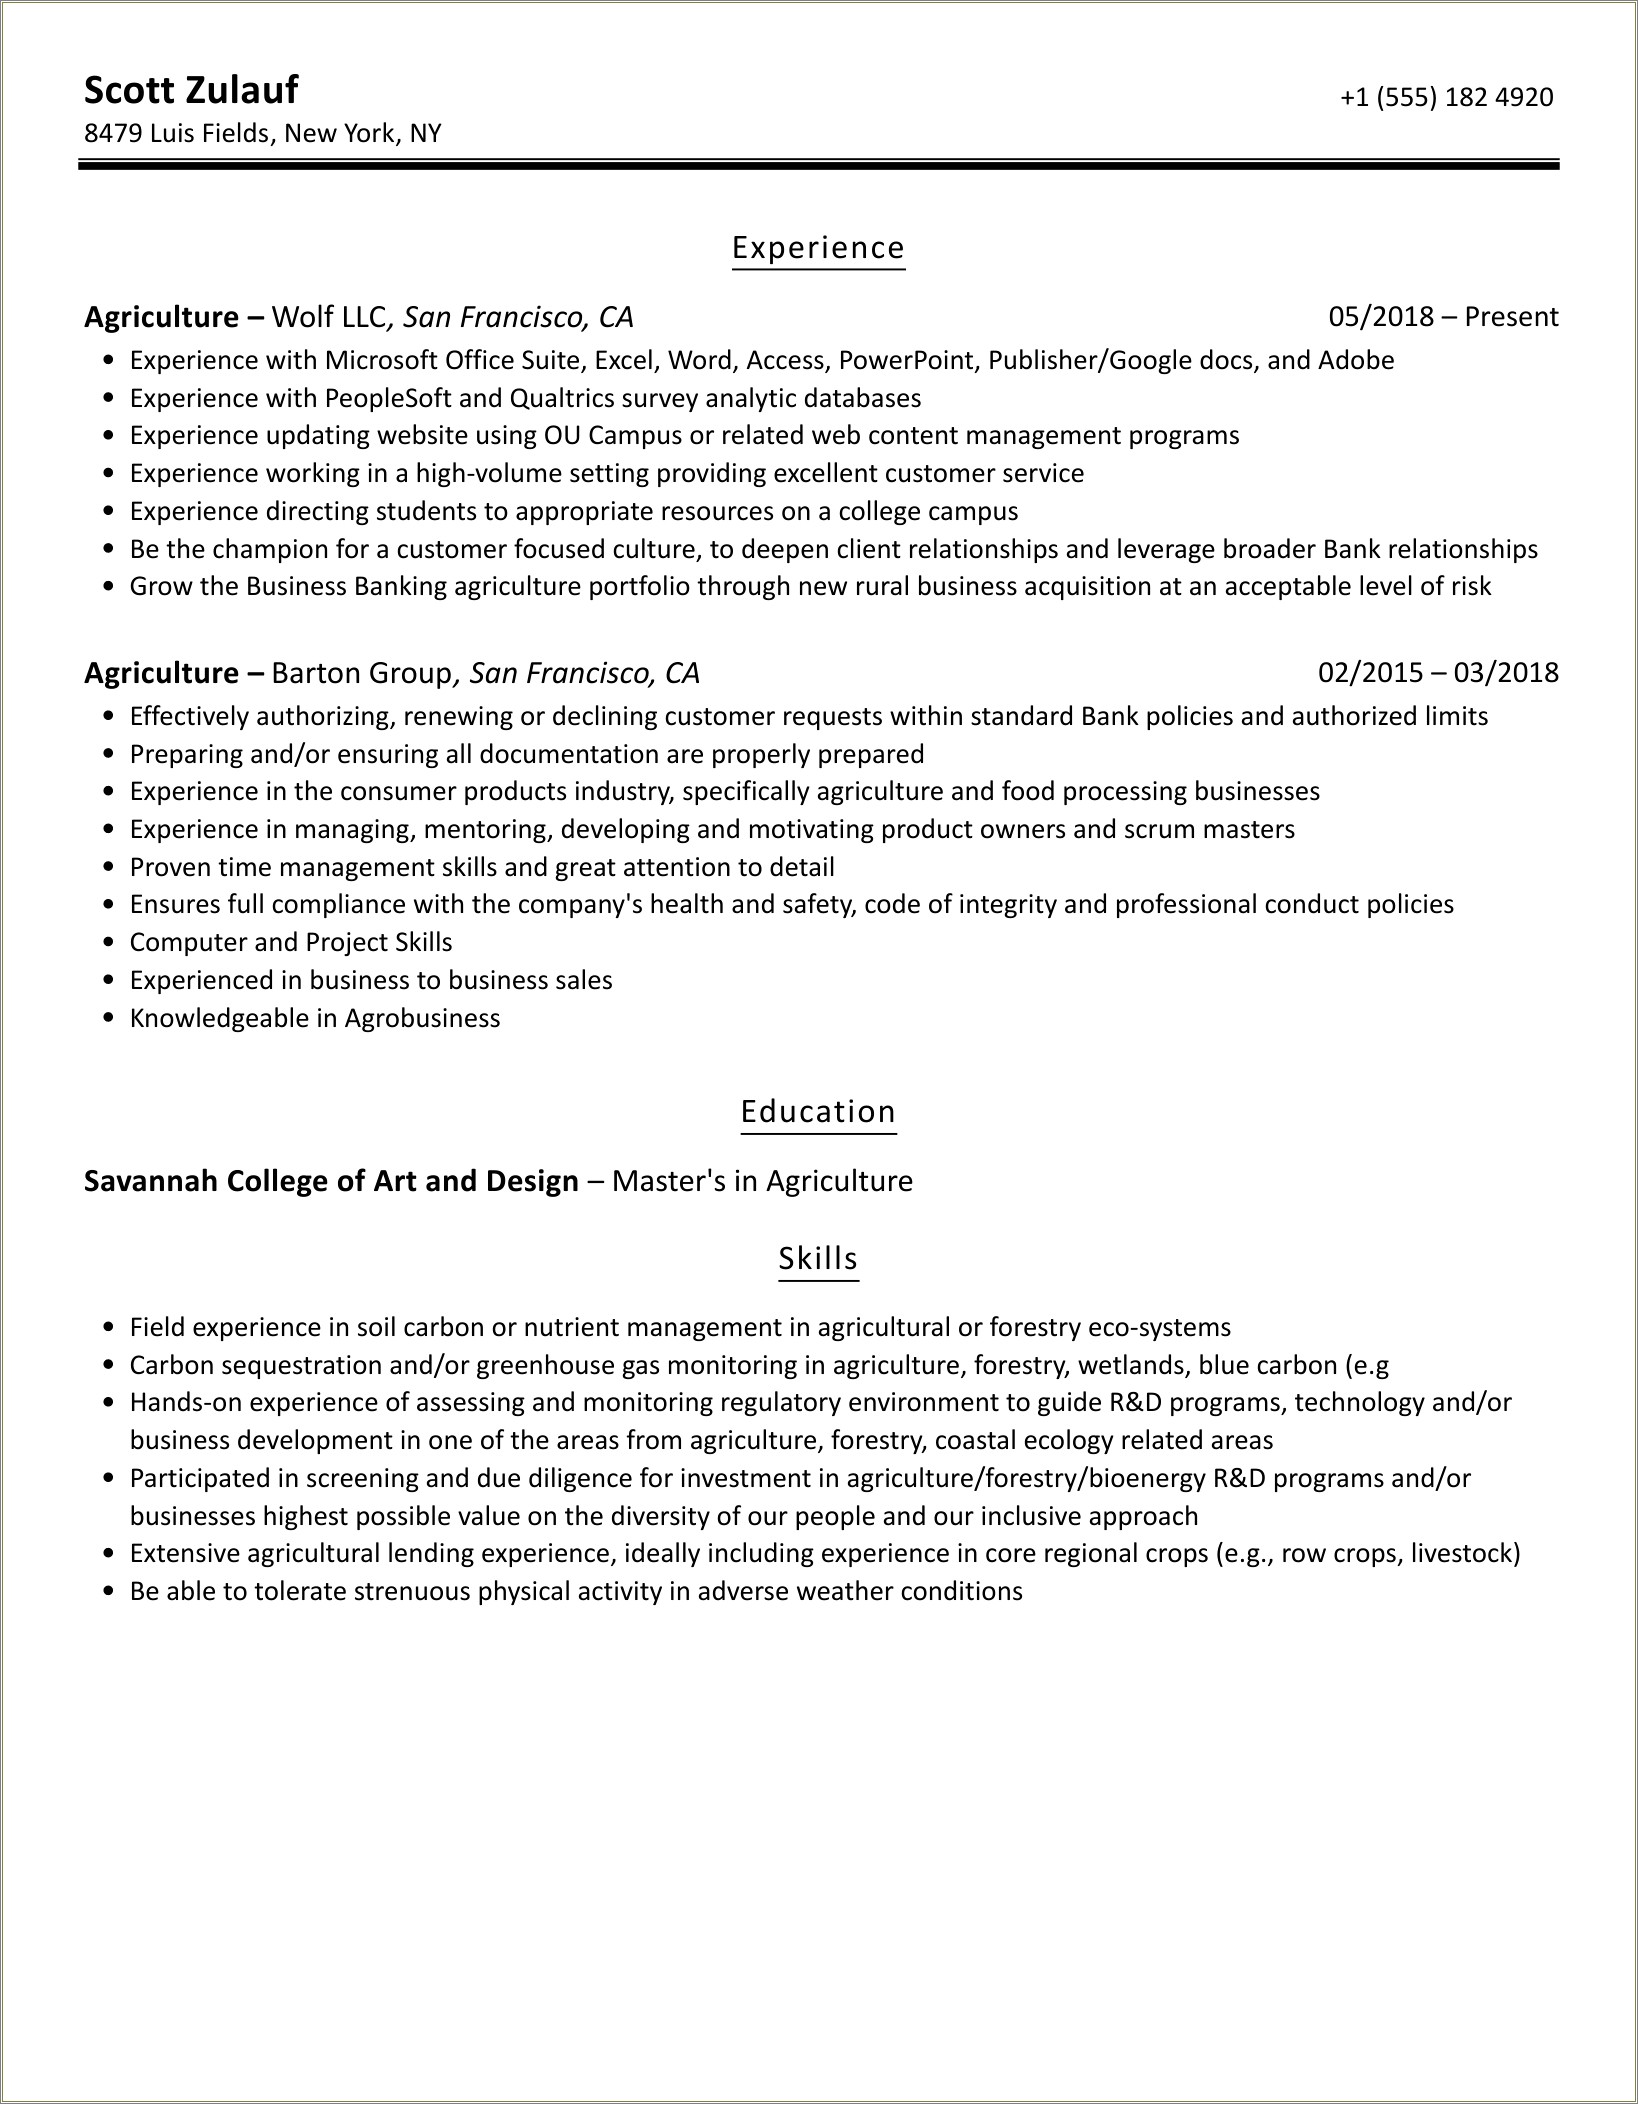 Sample Resume For Department Of Agriculture Jobs